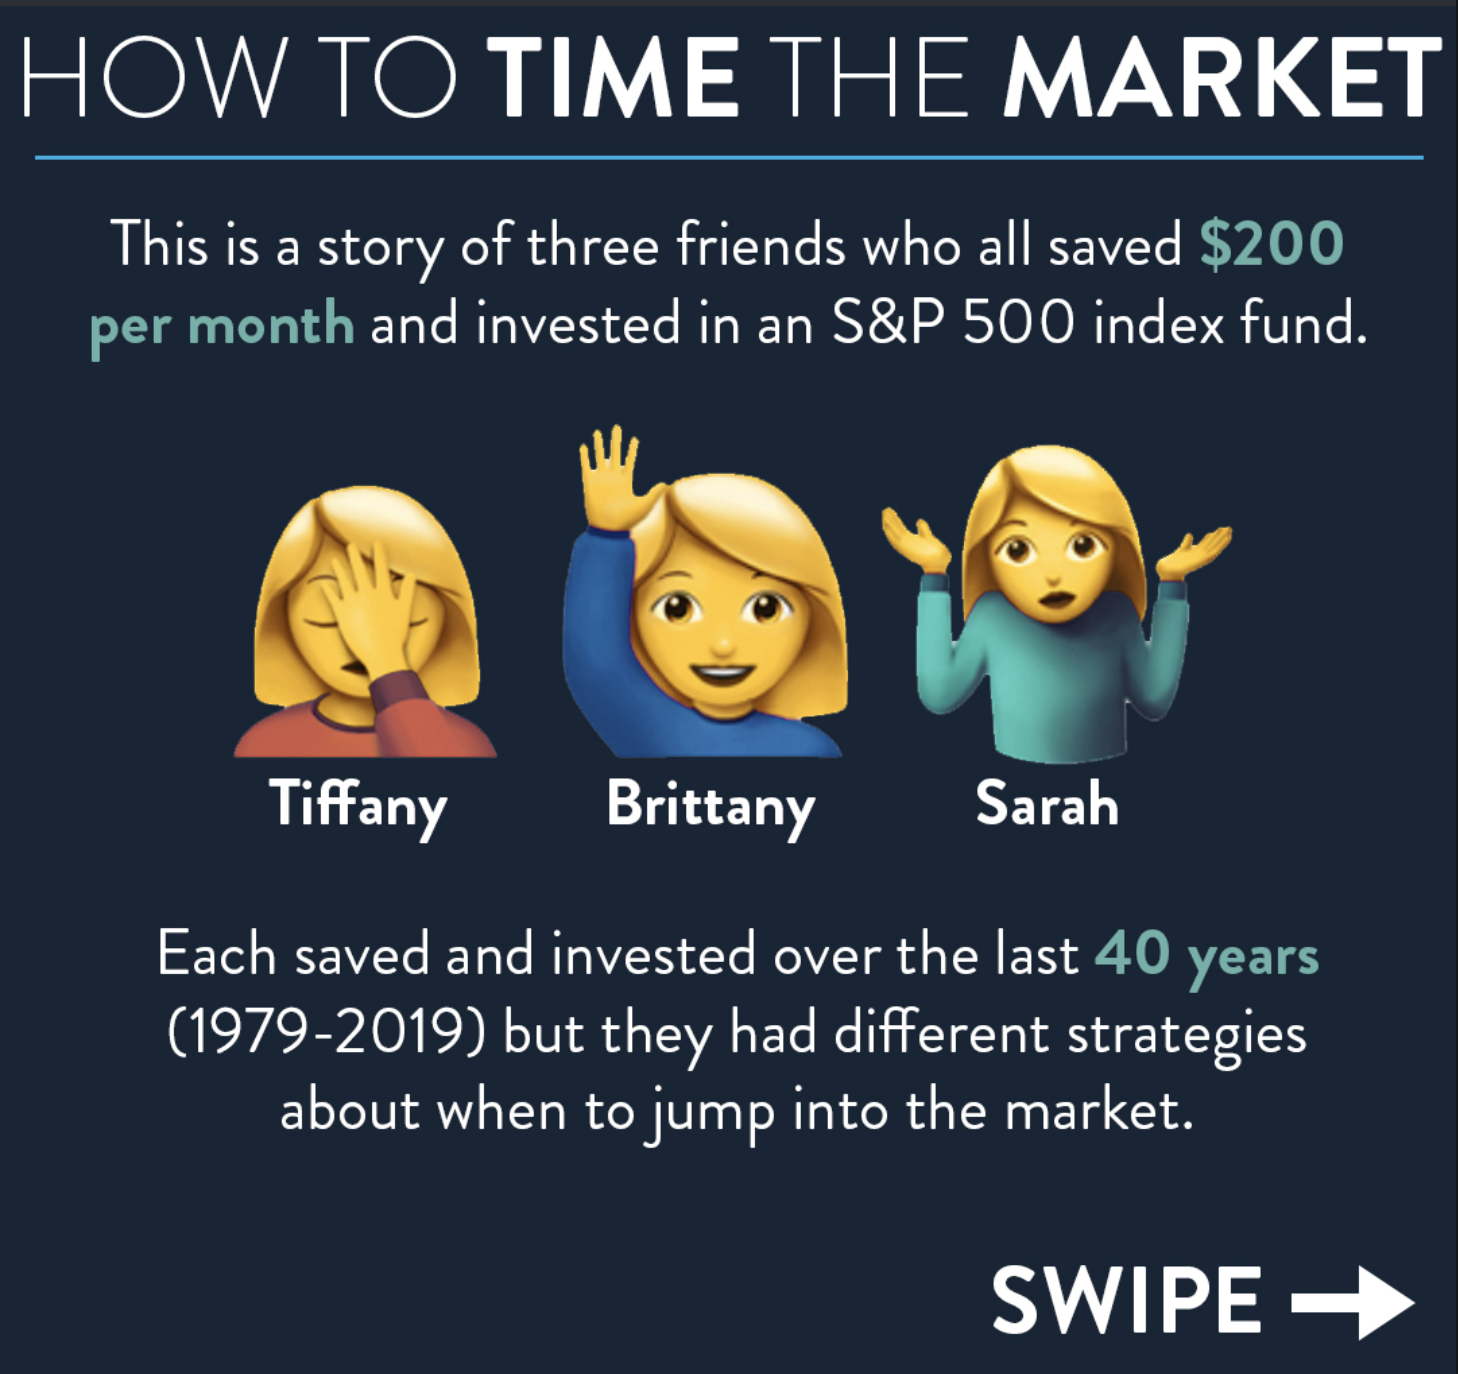 Time IN the market beats timINg the market